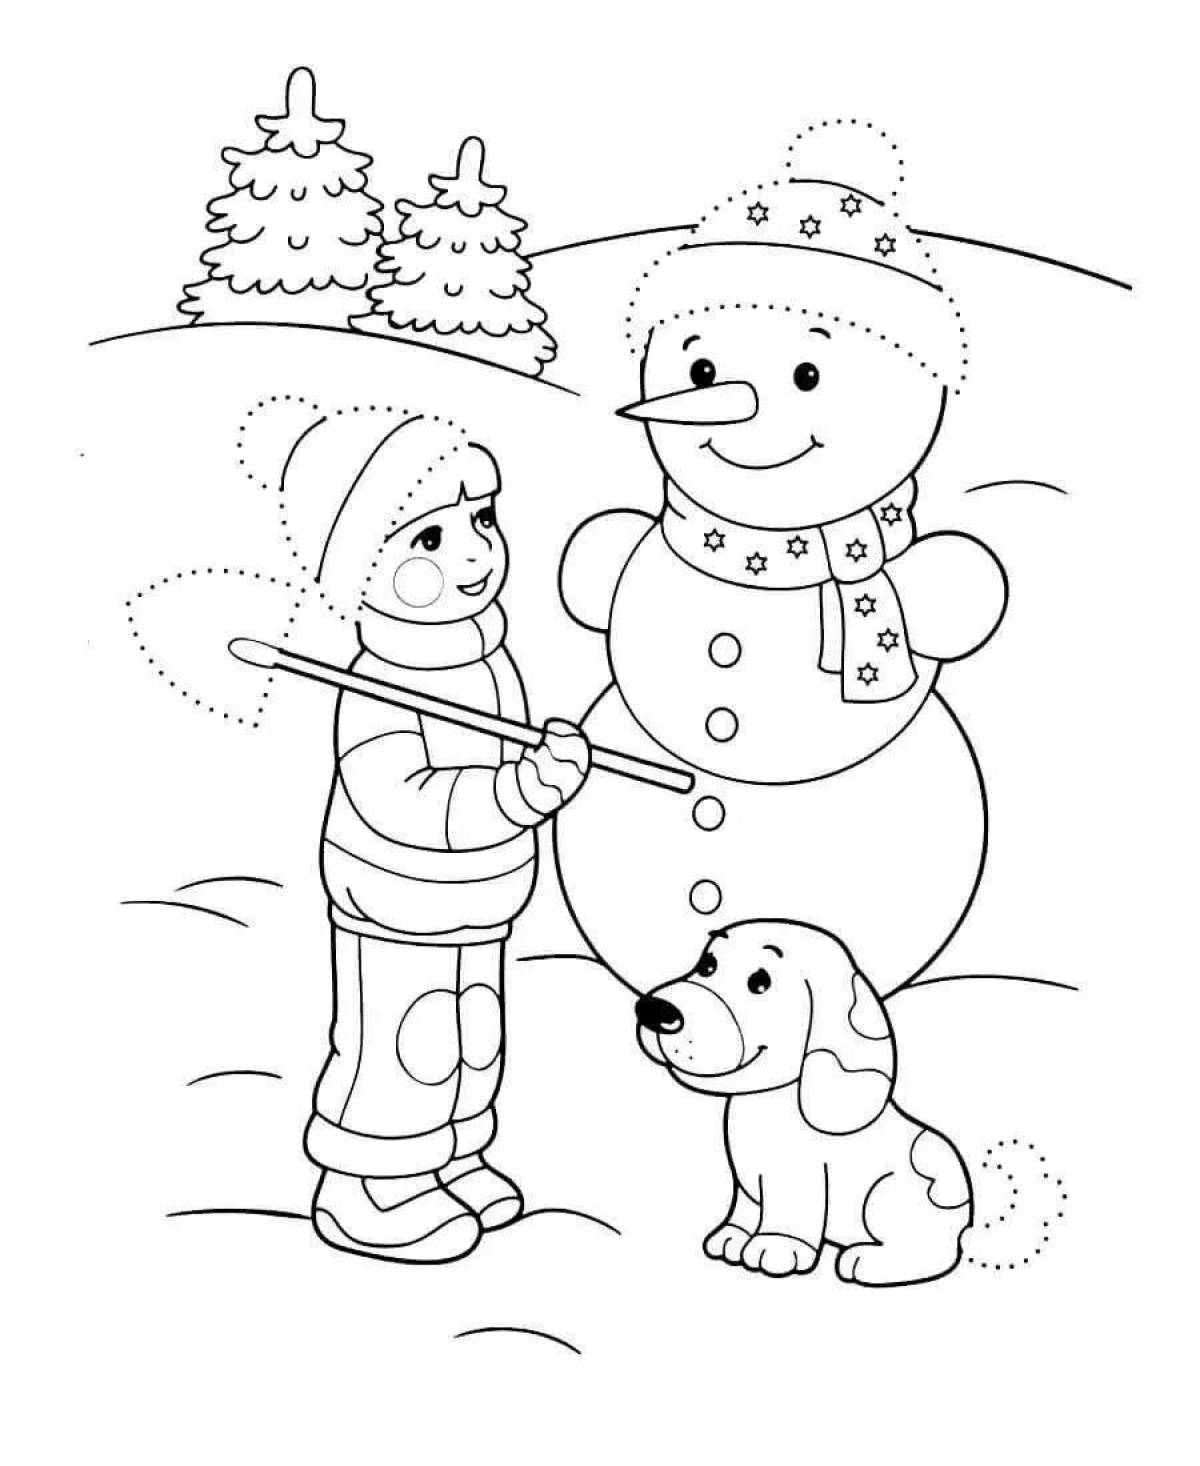 Brilliant coloring winter for children 10 years old